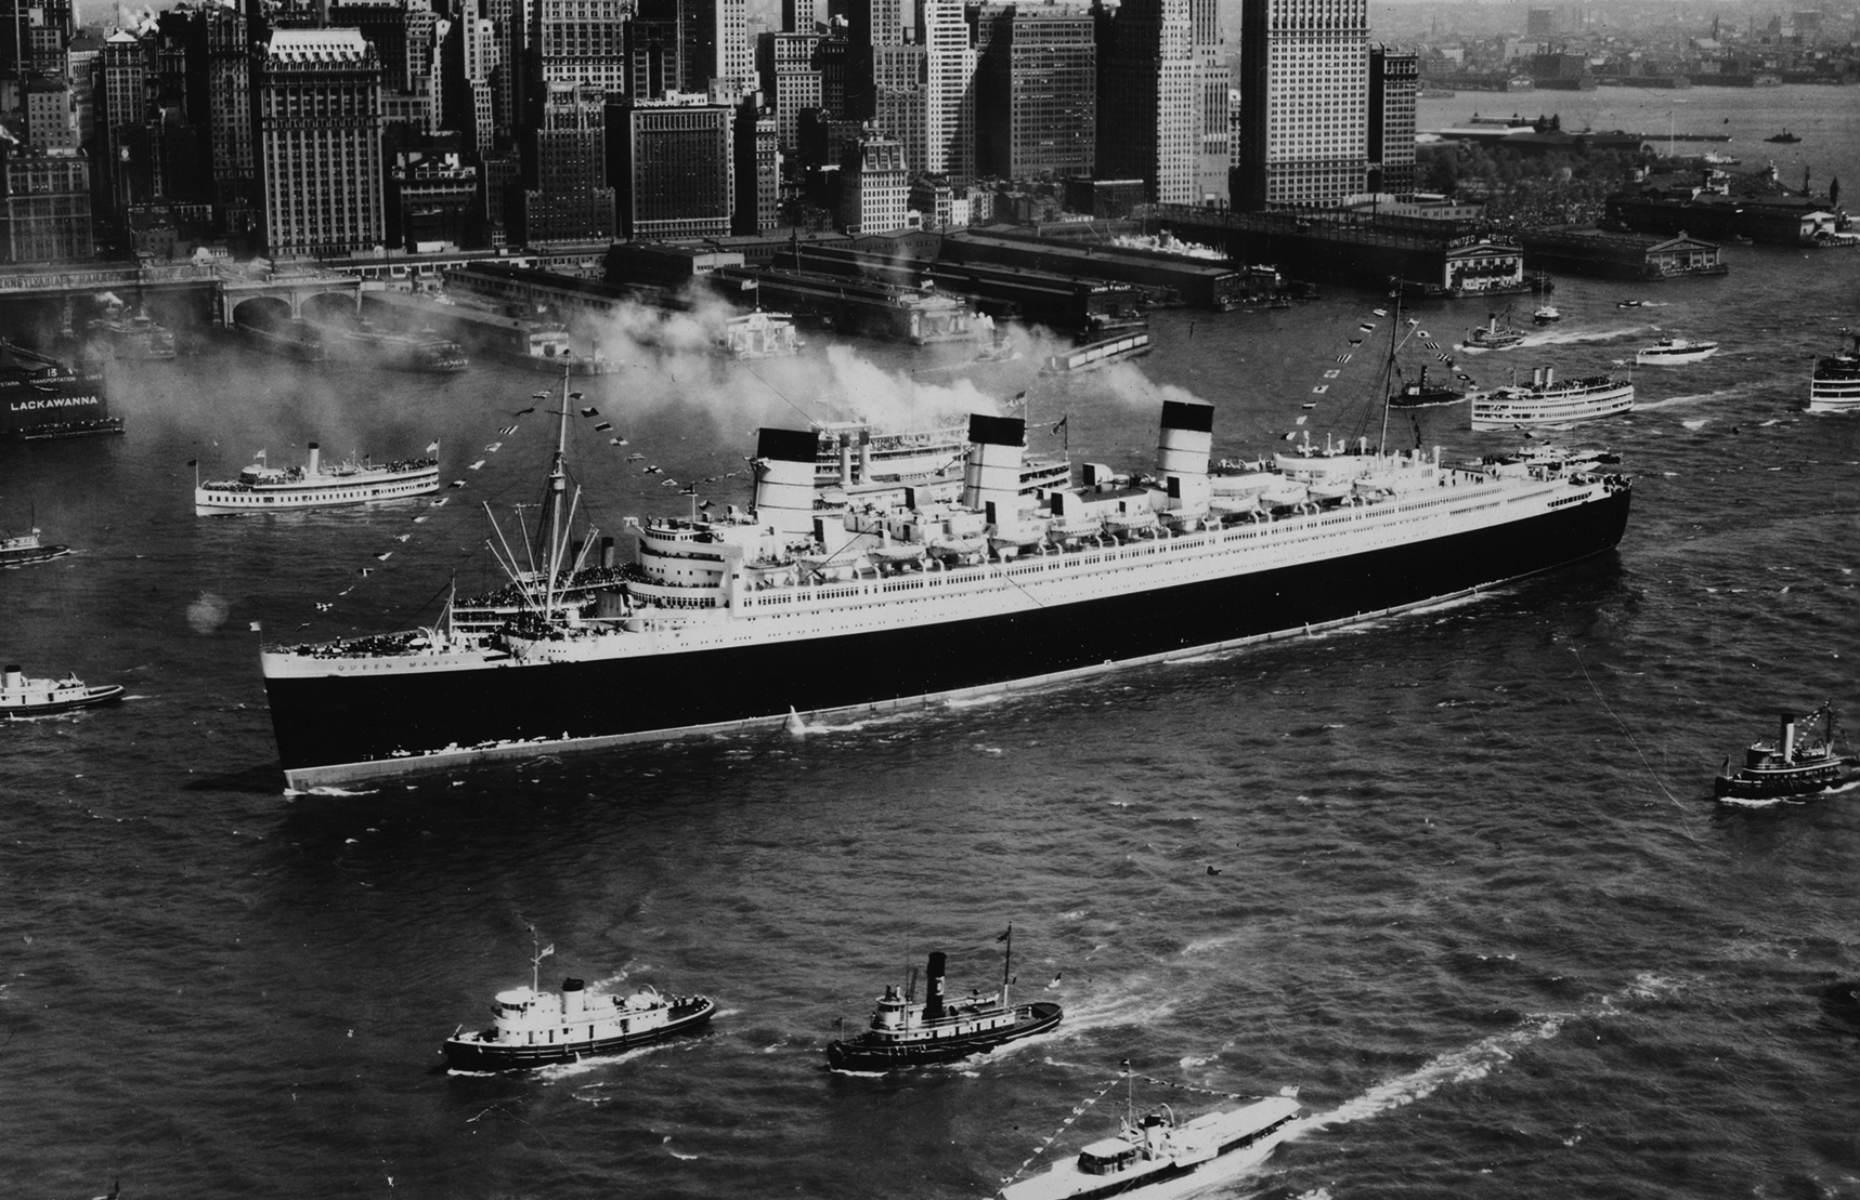 <p>This beautiful ocean liner offers a glimpse into the glamour of a bygone era. Built by the Cunard Line, the Queen Mary was the company’s flagship vessel, sailing the North Atlantic route and serving in the Second World War until she was retired in 1967. She represented a ground-breaking technological achievement, earning <a href="https://en.wikipedia.org/wiki/Blue_Riband#:~:text=The%20Blue%20Riband%20(%2F%CB%88r,widely%20used%20until%20after%201910.">the Blue Riband</a> on her maiden voyage. But she was also the height of luxury and one of the grandest ocean liners ever built, which made her popular with British royalty and Hollywood film stars. </p>